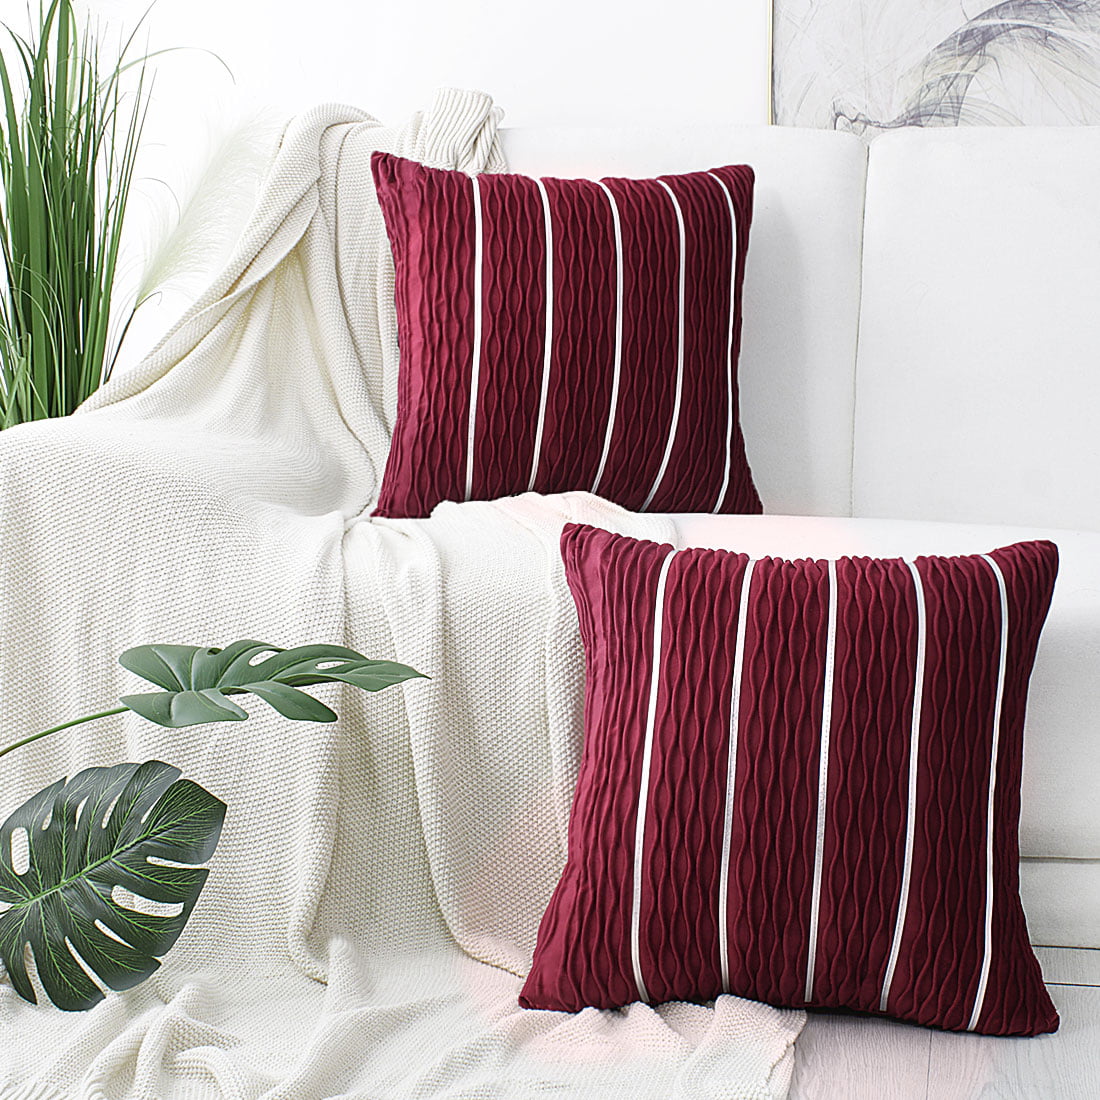 PiccoCasa 2Pcs 20 x 20 Inch Jacquard Striped Velvet Throw Pillow Covers, Wave Cushion Covers for